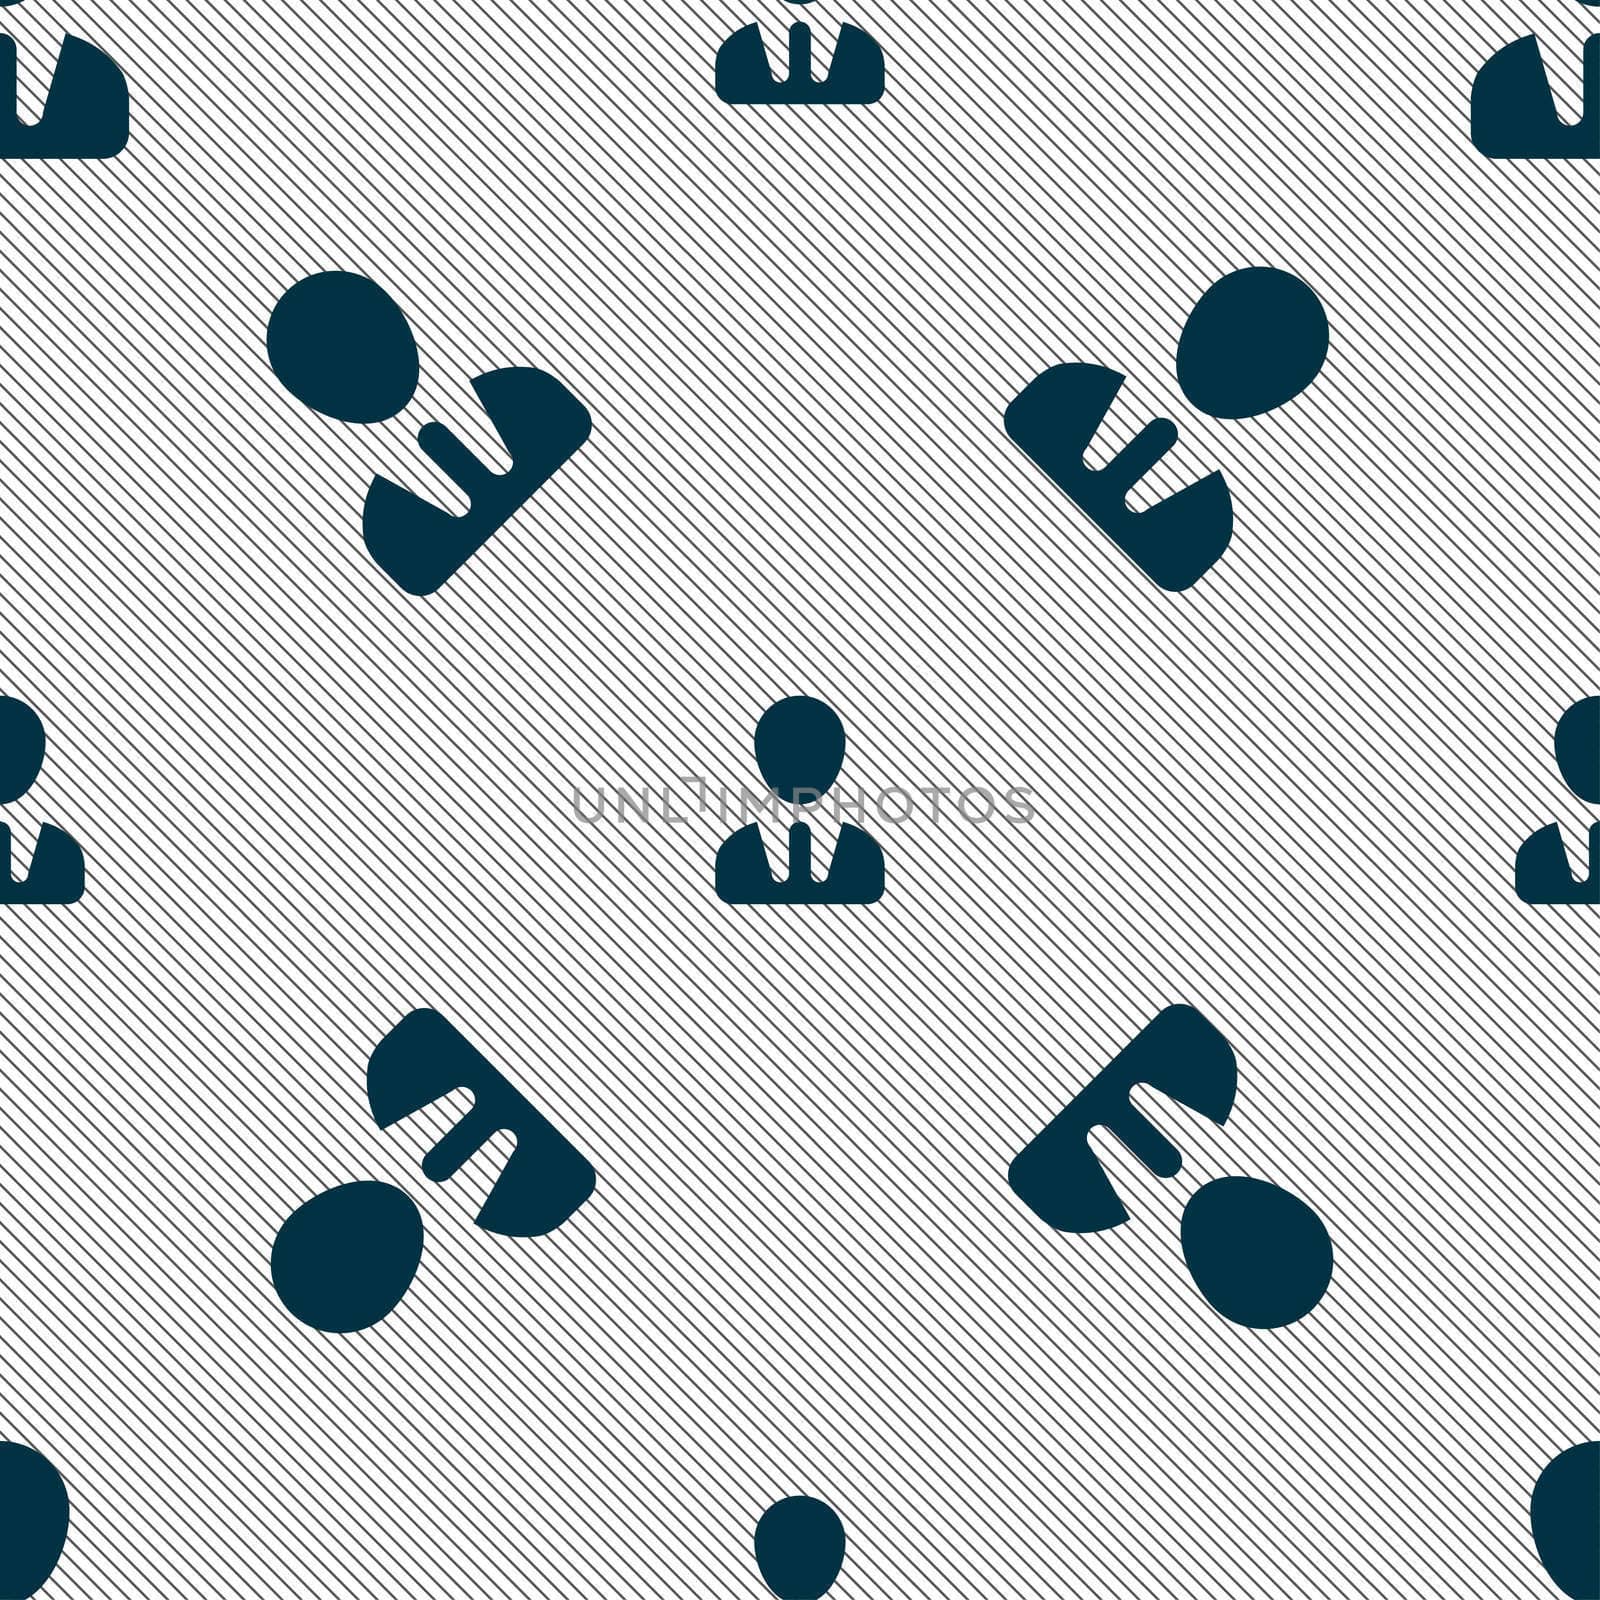 male silhouette icon sign. Seamless pattern with geometric texture. illustration